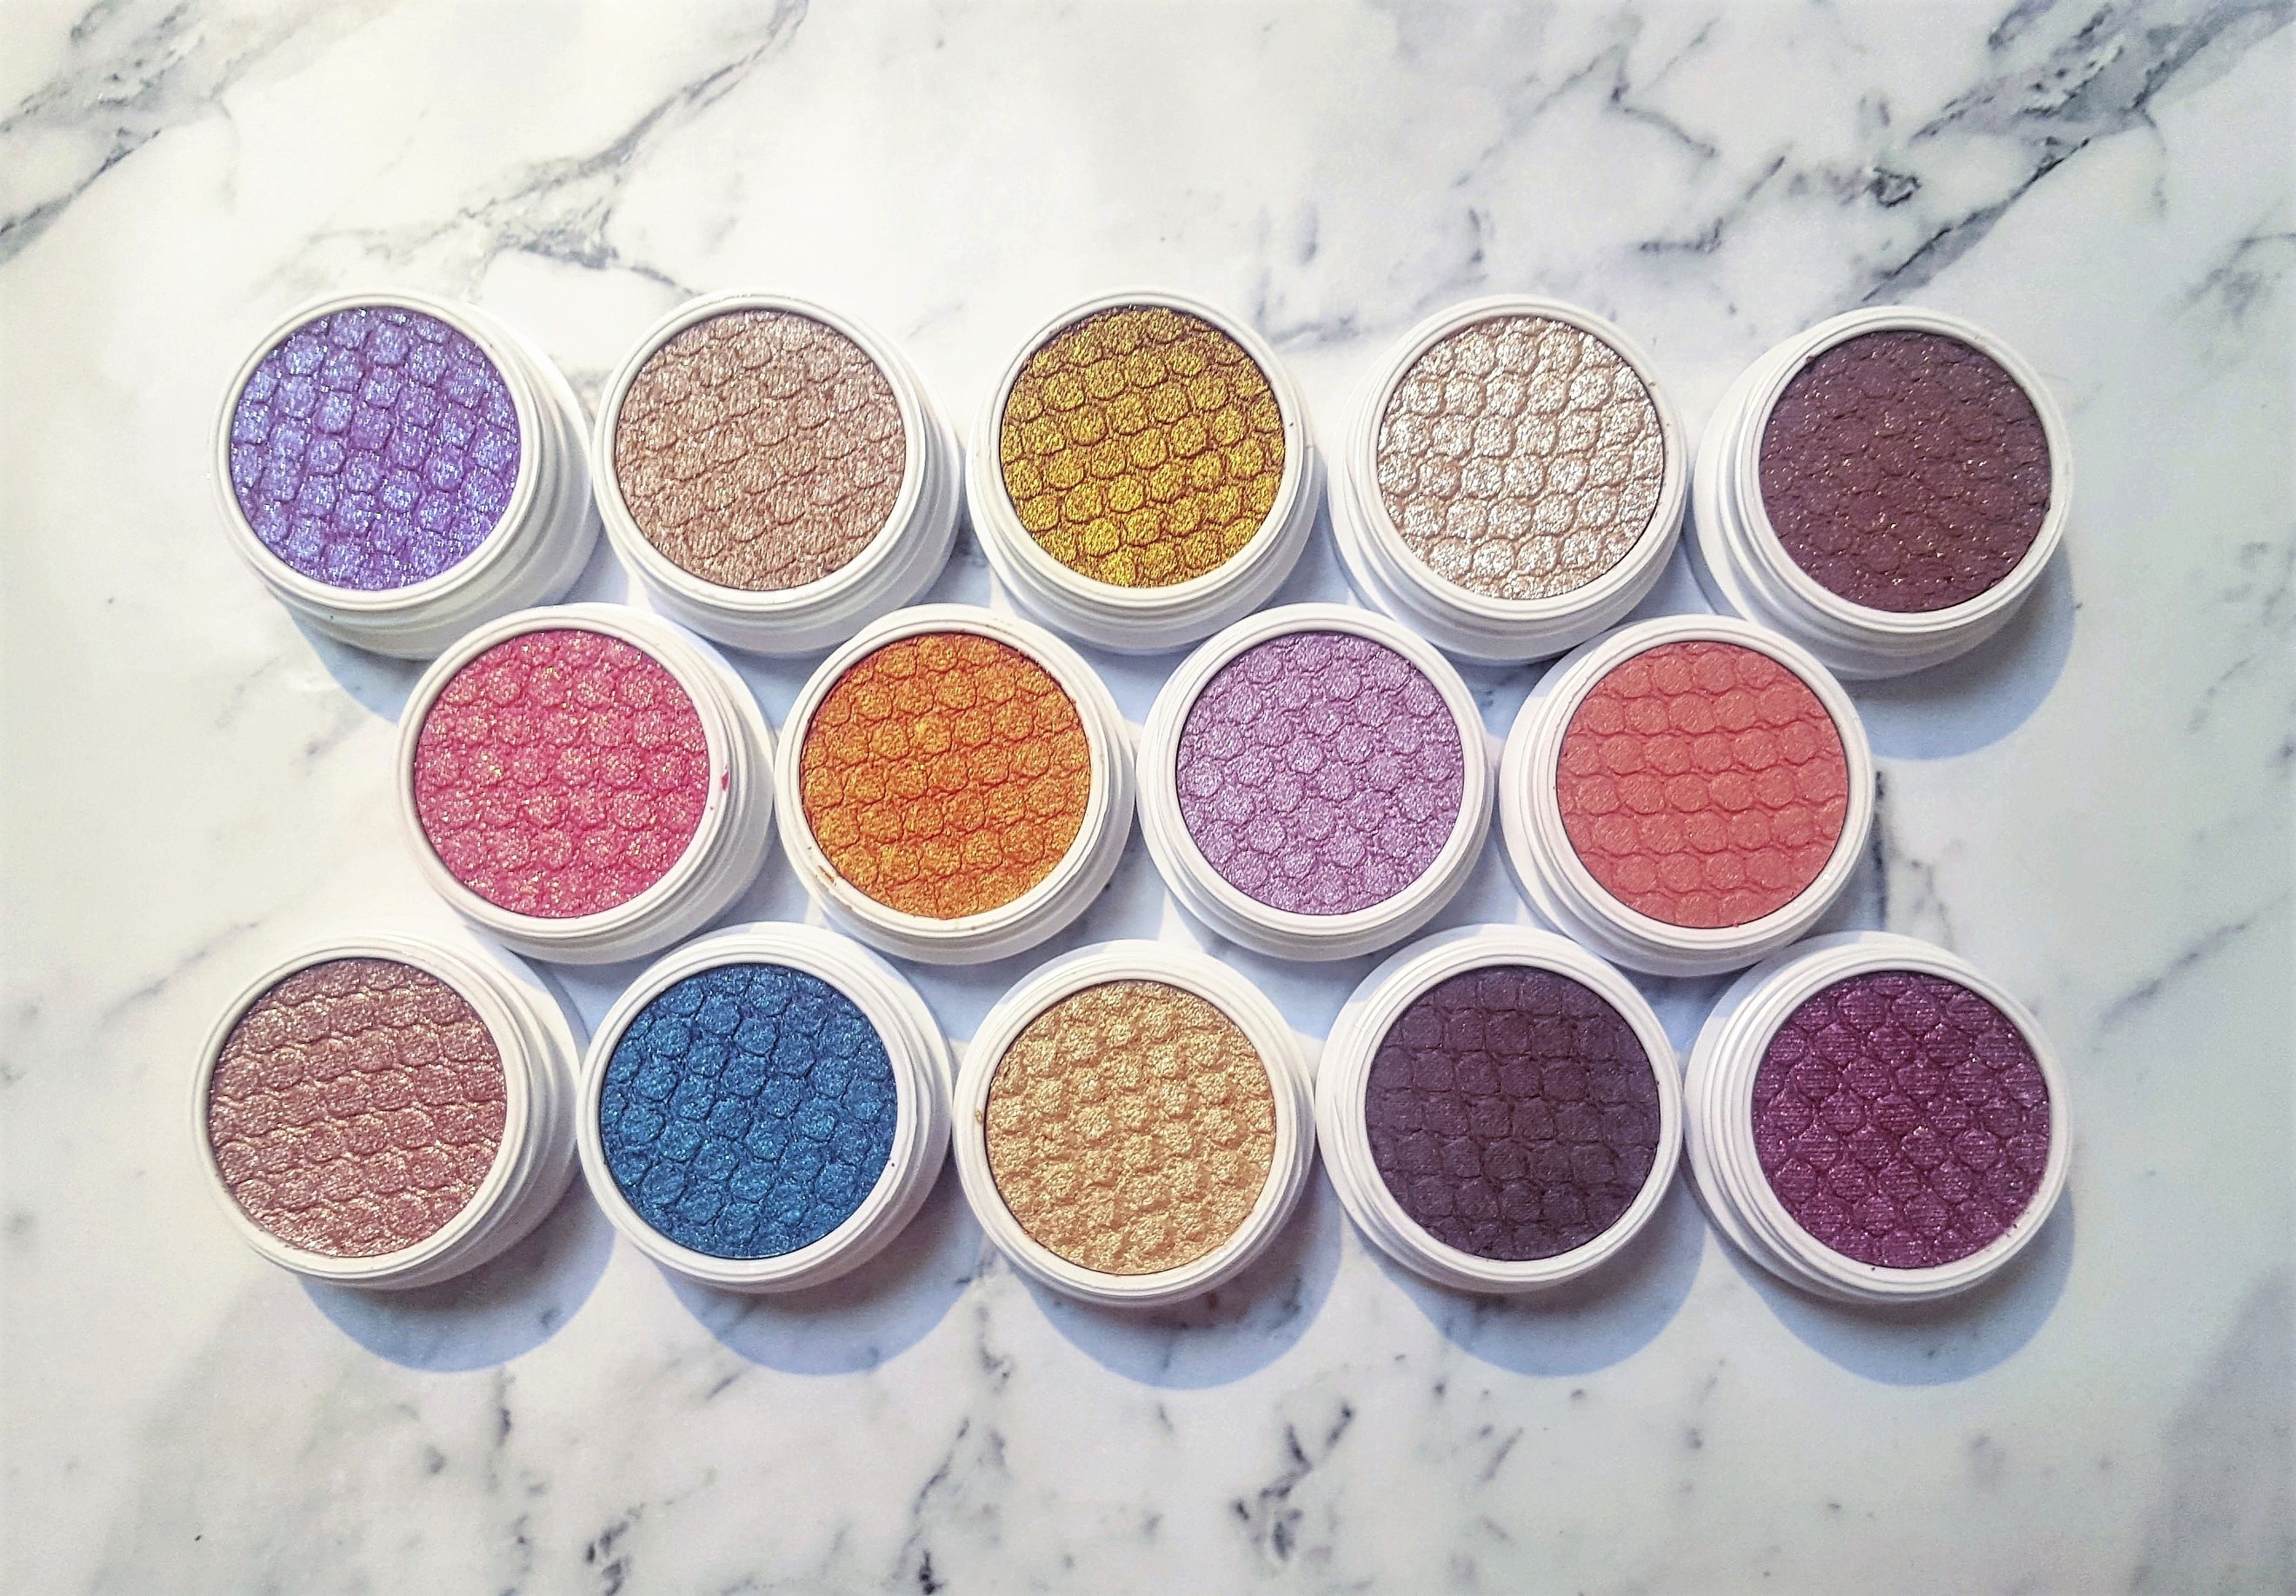 Colourpop Butterfly Collection Swatches and Review (Part 1): Super Shock Shadows